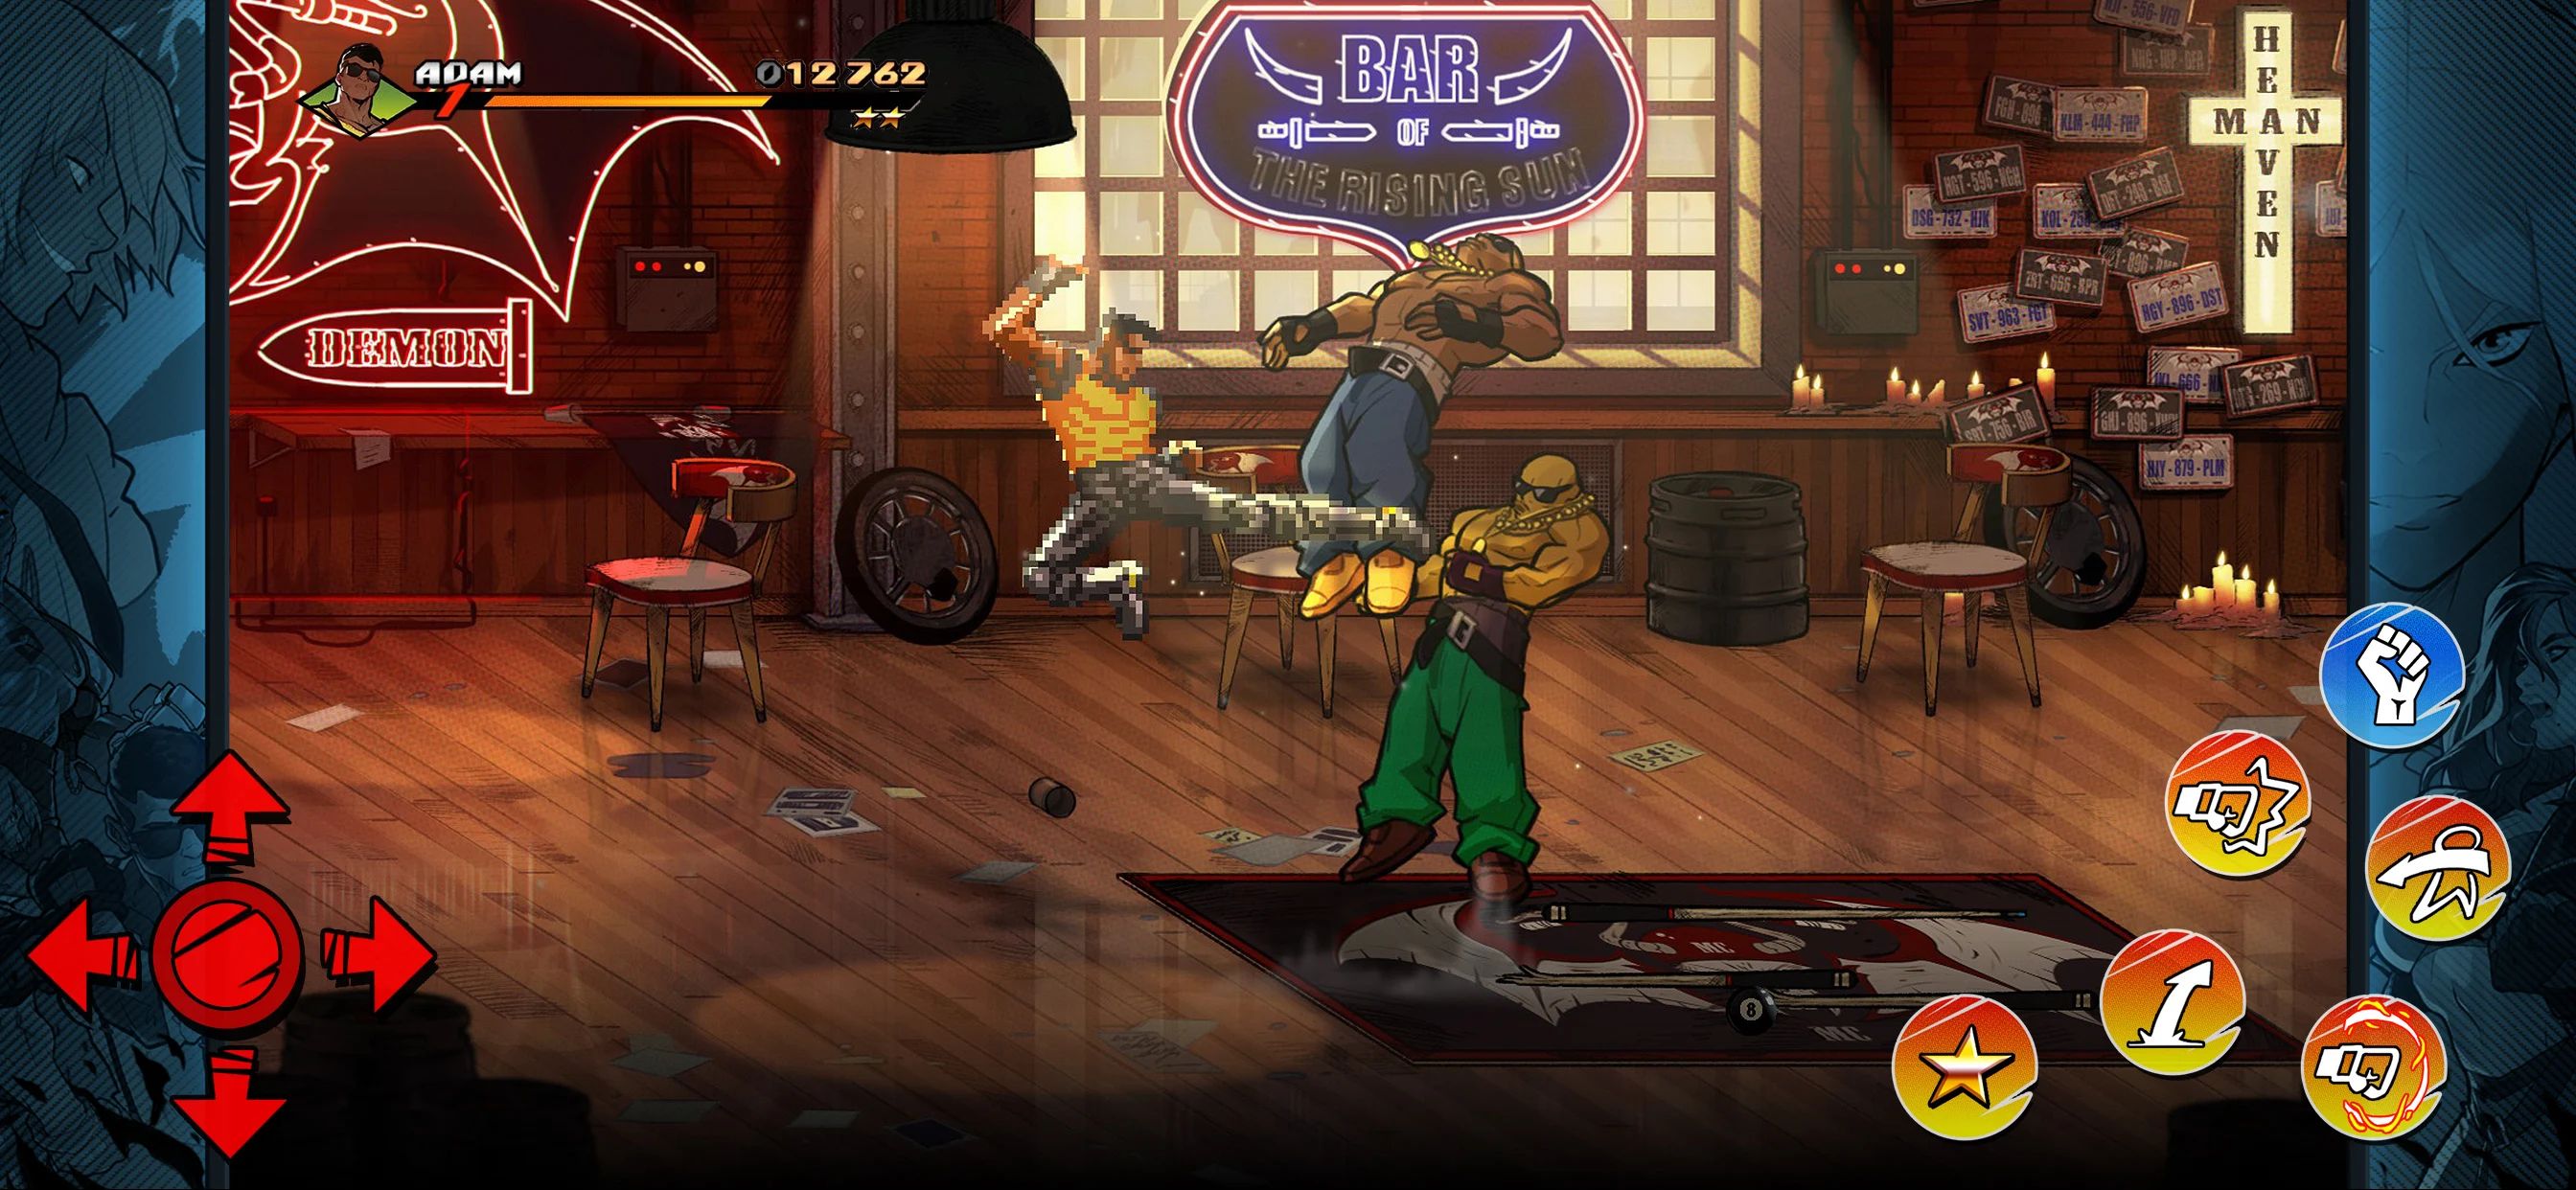 best-beat-em-up-games-streets-of-rage-4-bar-of-the-rising-sun